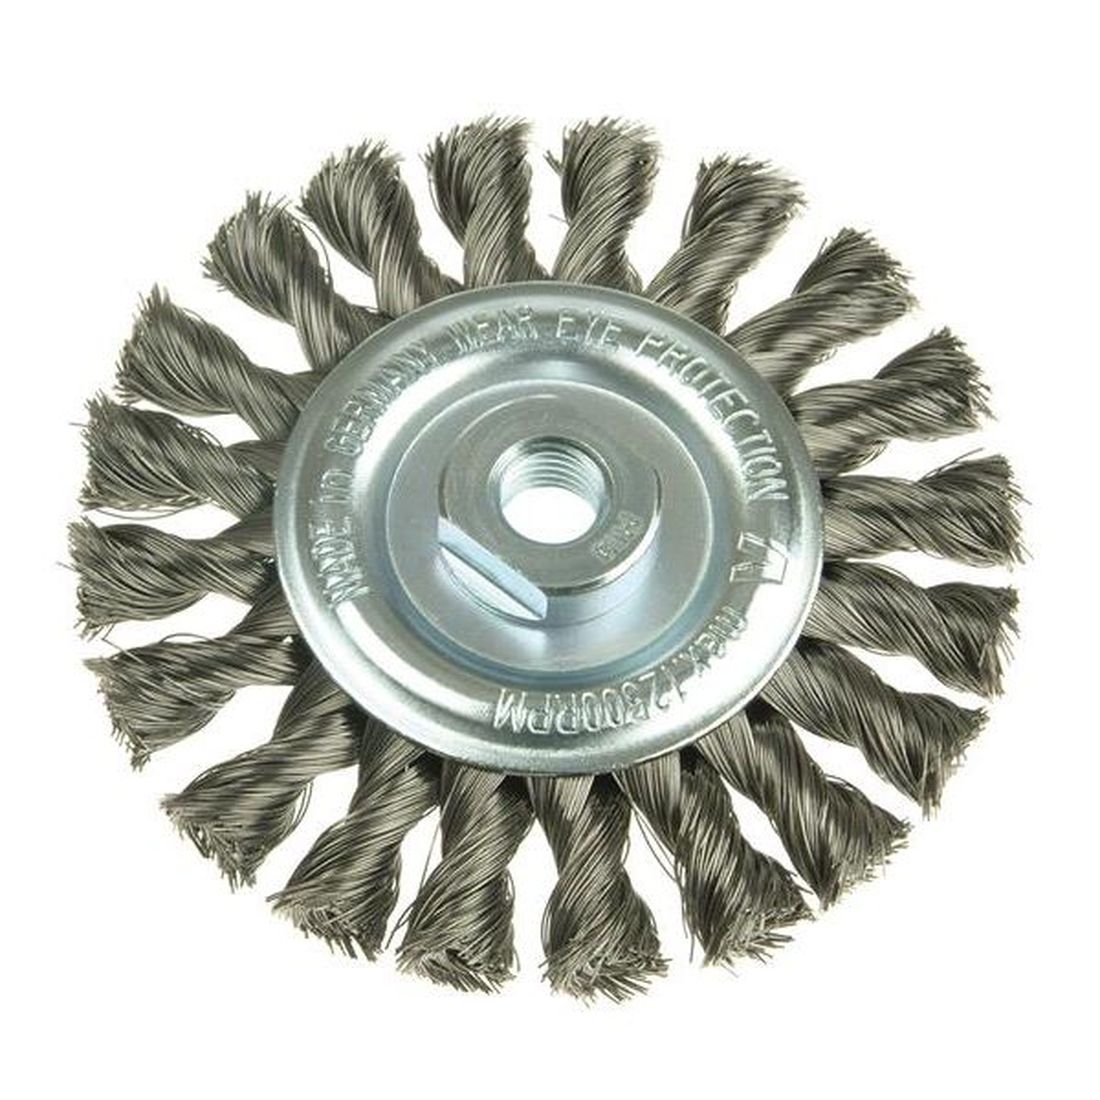 Lessmann Knot Wheel Brush 115 x 14mm 22.2mm Bore, 0.50 Stainless Steel Wire              